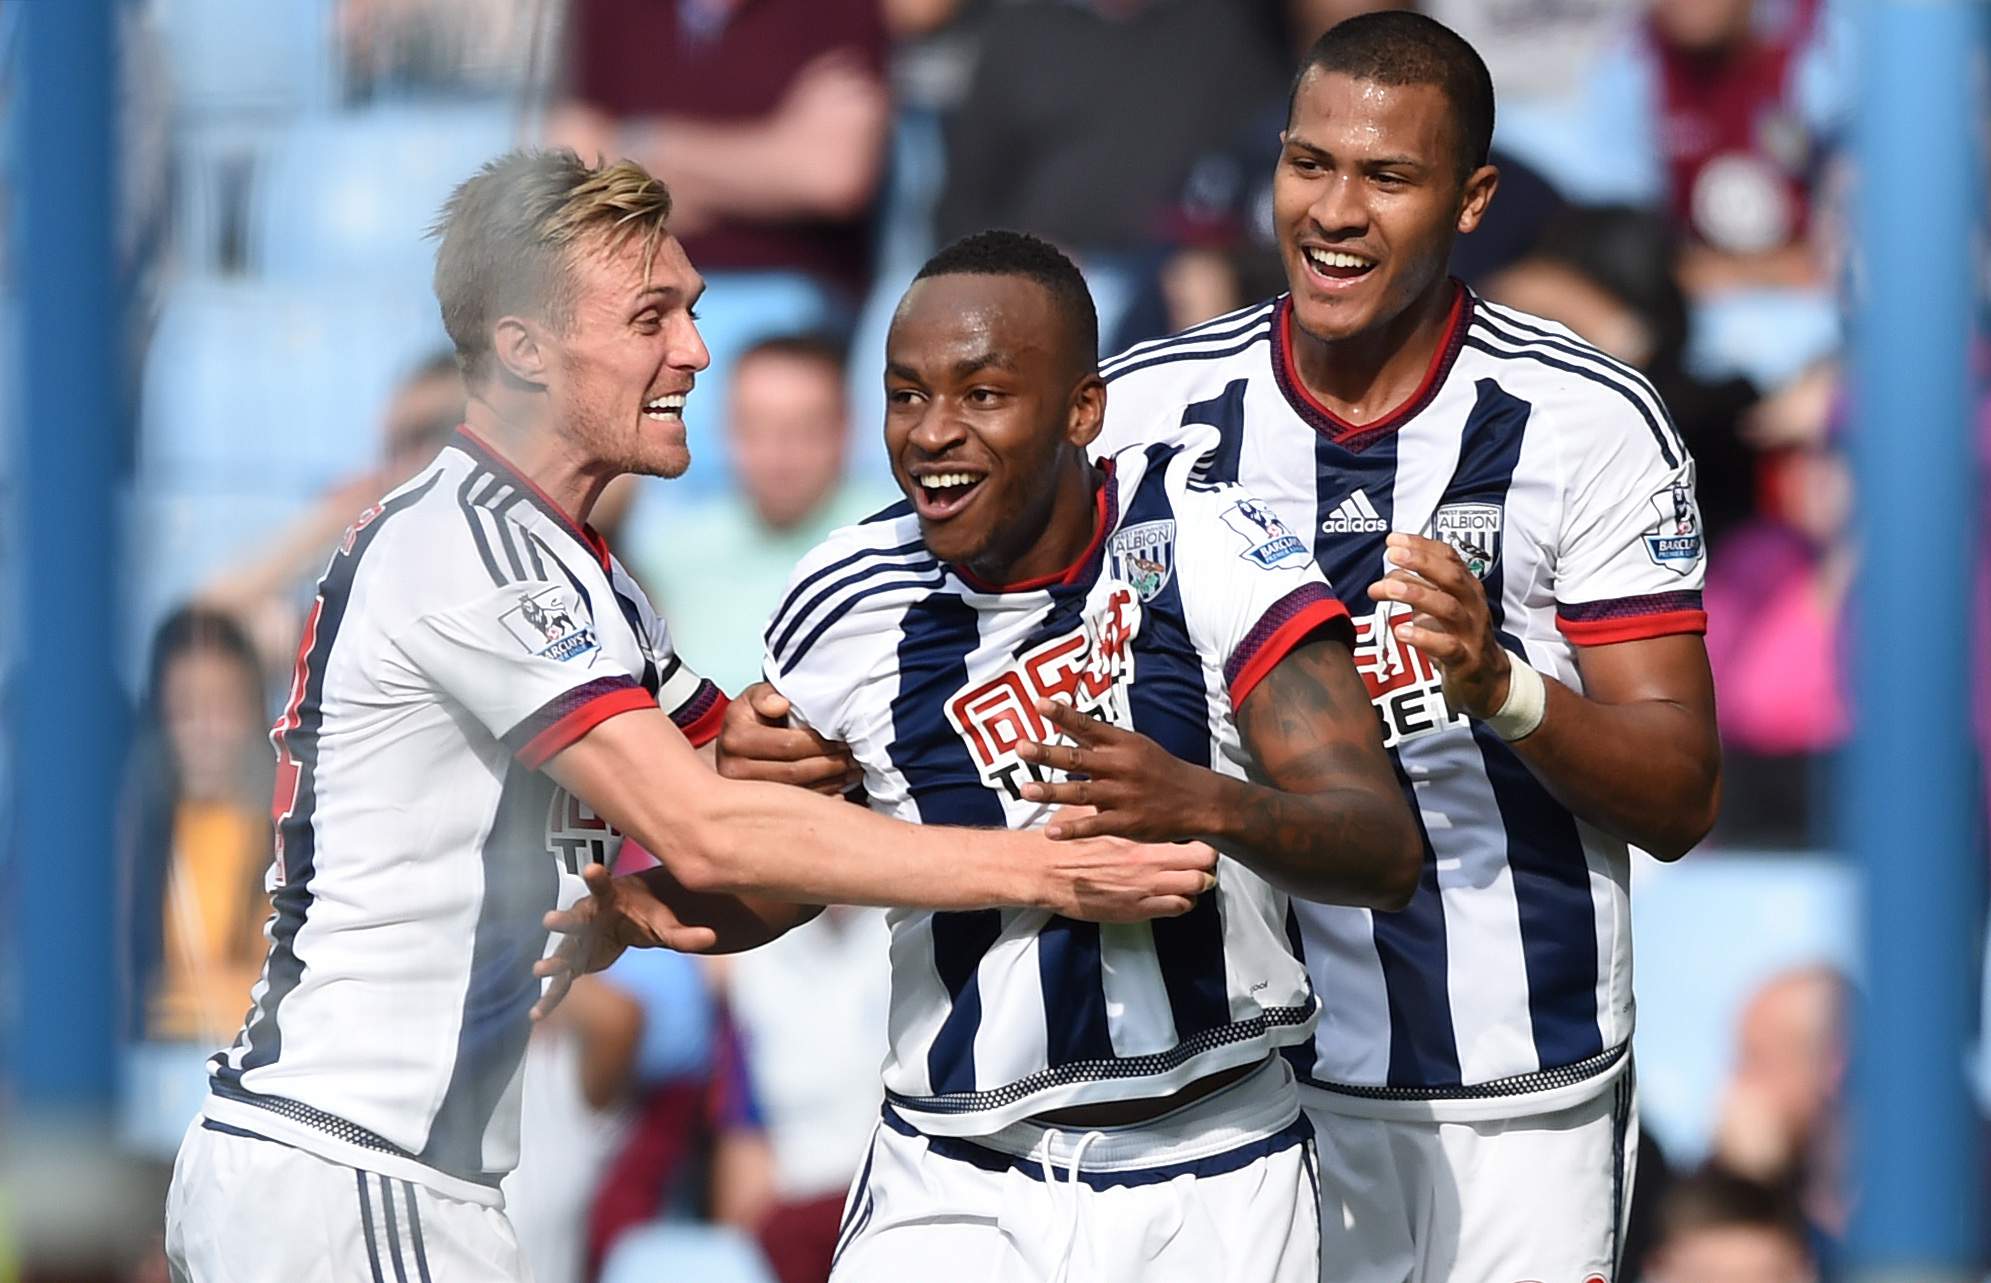 Football - Aston Villa v West Bromwich Albion - Barclays Premier League - Villa Park - 19/9/15 Saido Berahino (C) celebrates with team mates after scoring the first goal for West Brom Mandatory Credit: Action Images / Tony O'Brien Livepic EDITORIAL USE ONLY. No use with unauthorized audio, video, data, fixture lists, club/league logos or "live" services. Online in-match use limited to 45 images, no video emulation. No use in betting, games or single club/league/player publications.  Please contact your account representative for further details.